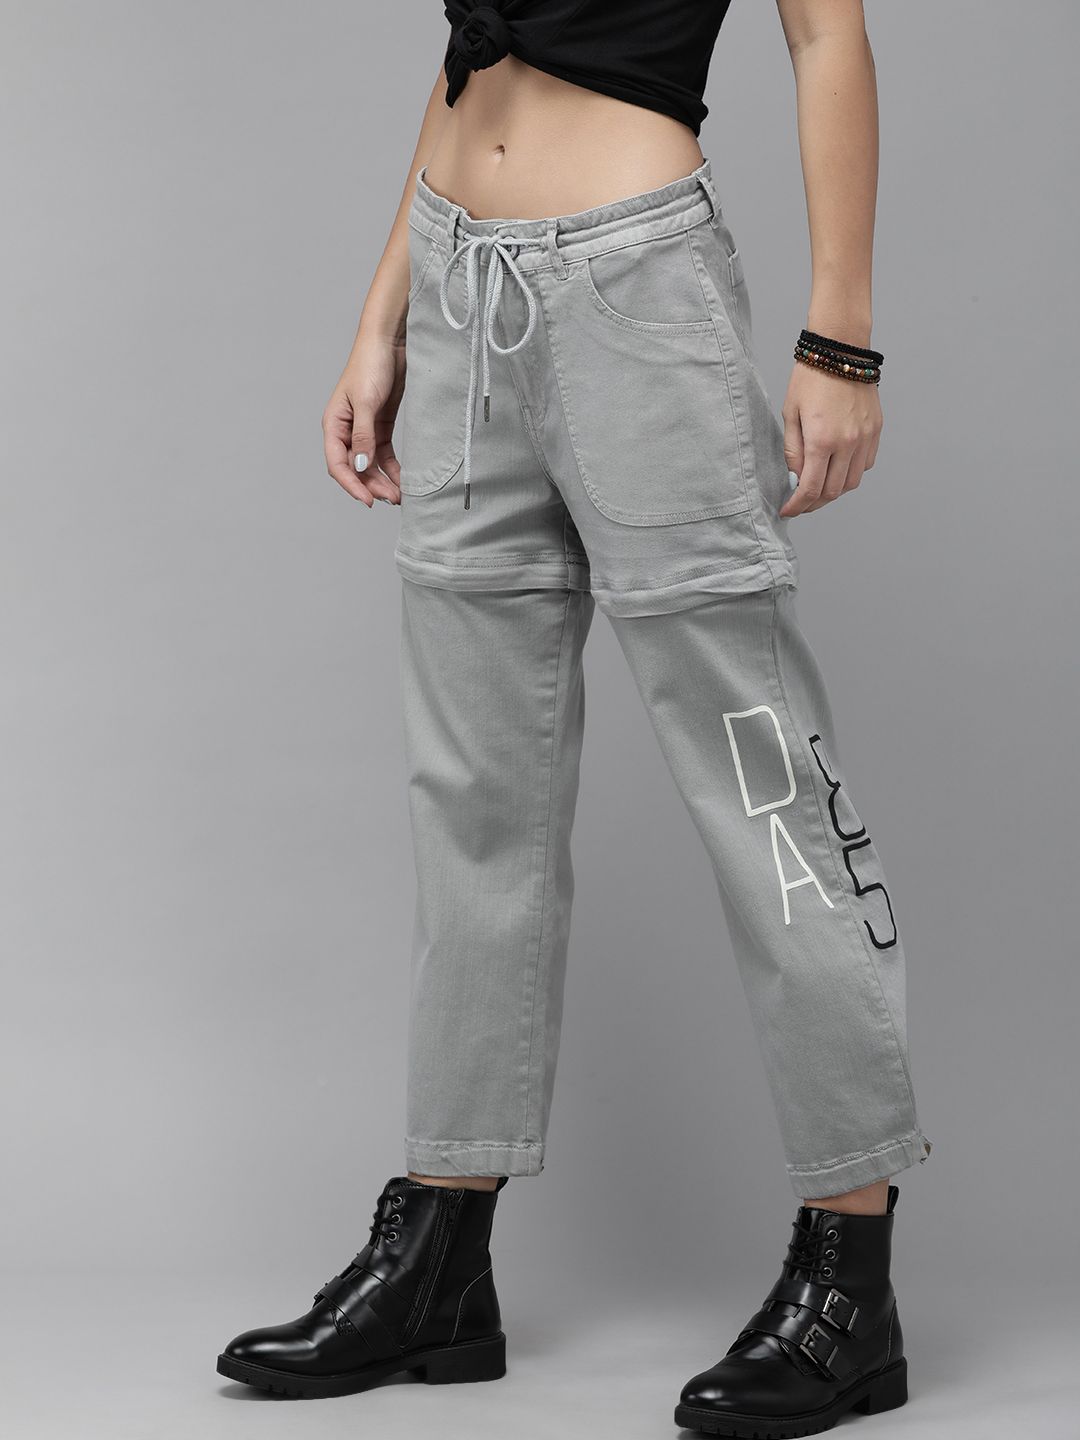 Roadster Women Grey Solid Mid-Rise Convertible Joggers-Shorts Price in India